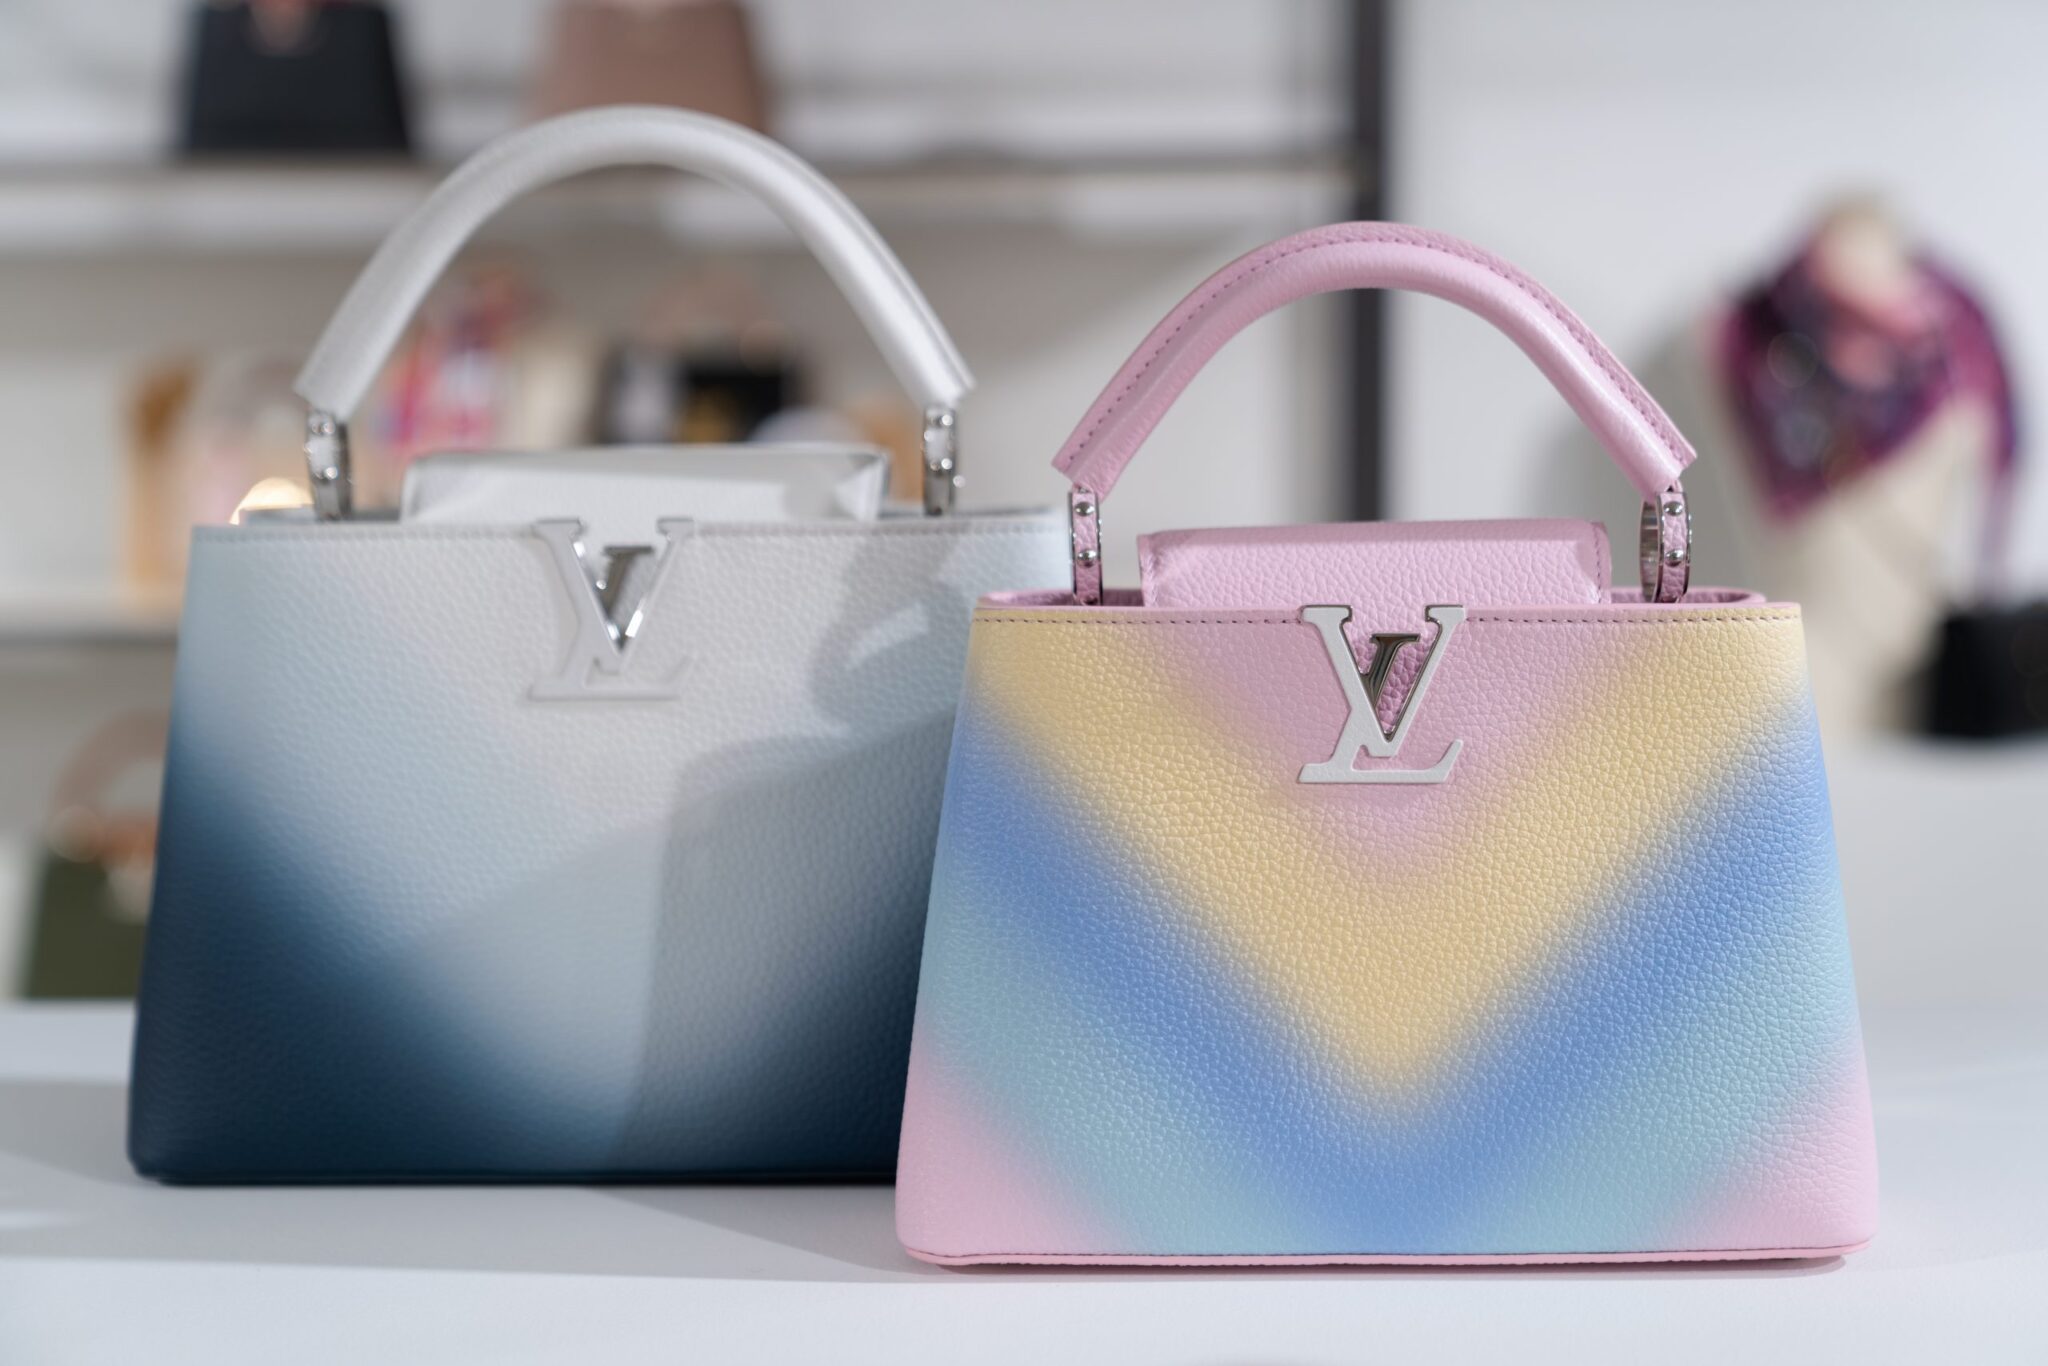 Game on: Louis Vuitton's Cruise '21 collection just dropped - Buro 24/7